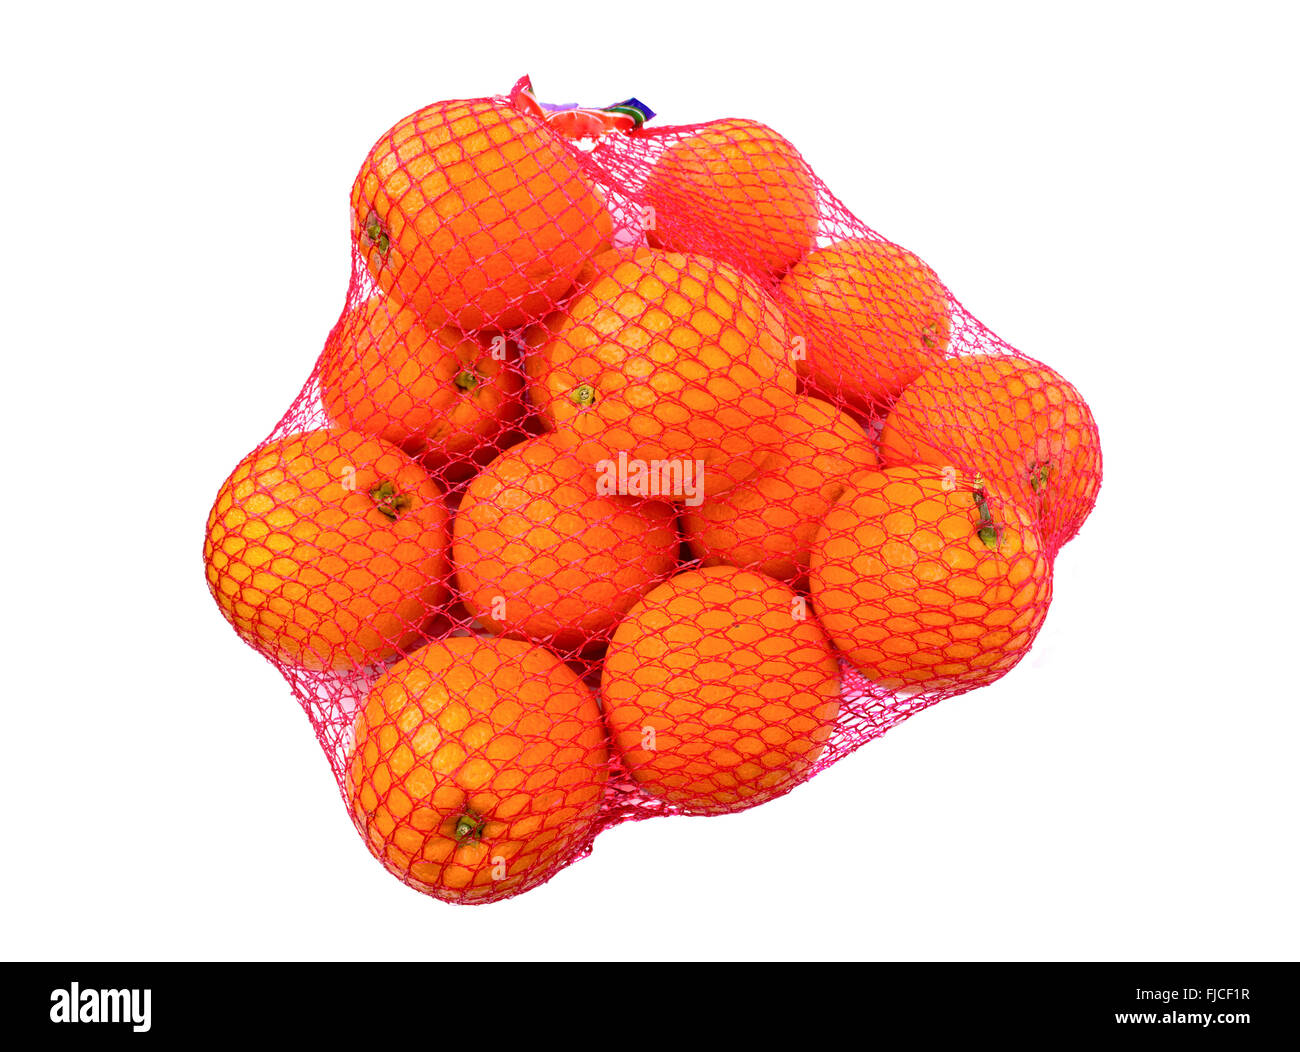 Oranges in net over white background Stock Photo